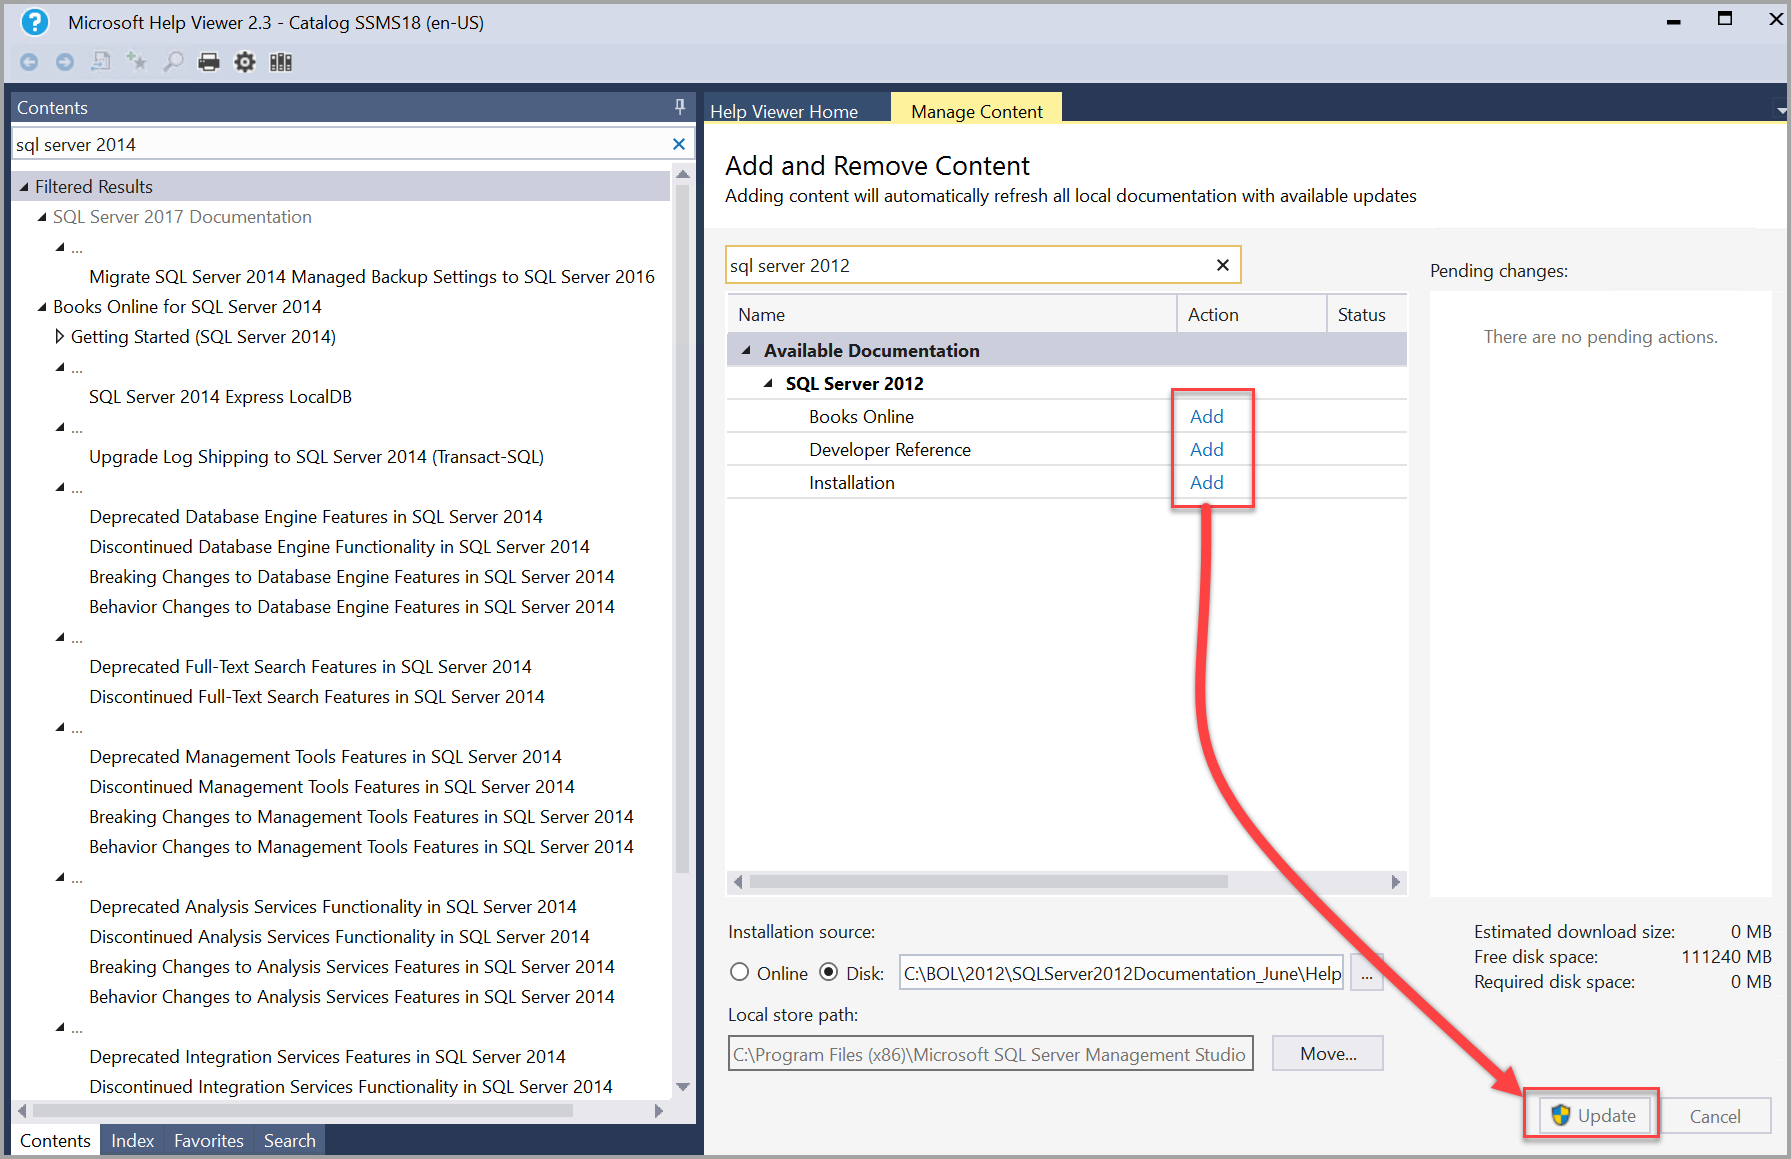 SQL Server 2014 books add and update in Help Viewer